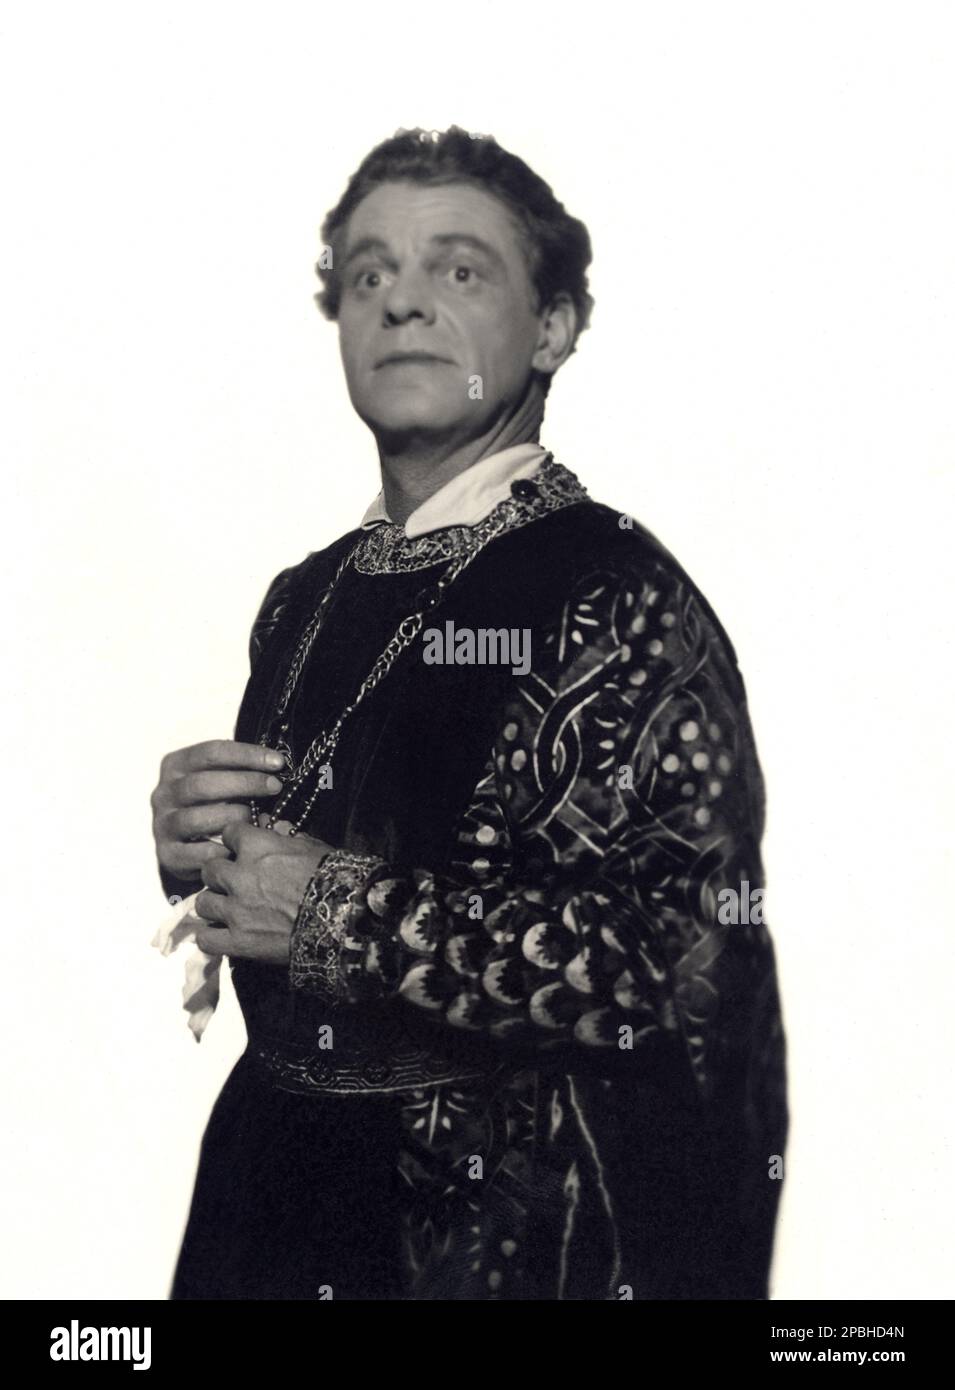 1933,  Milano , ITALY: The german-albanian theatre actor  ALEXANDER MOISSI ( 1879 - 1935 ) in JEDERMANN ( Everyman ) at Cortile of Sant Ambrogio, july-august 1933,  by Hugo von Hofmannsthal , director Lotario Wallerstein , decor and costume by CARAMBA .  - MISTERO MEDIOEVALE - Alessandro Moisi - Aleksander Moisiu - TEATRO - THEATER - THEATRE - attore teatrale  ----  Archivio GBB Stock Photo